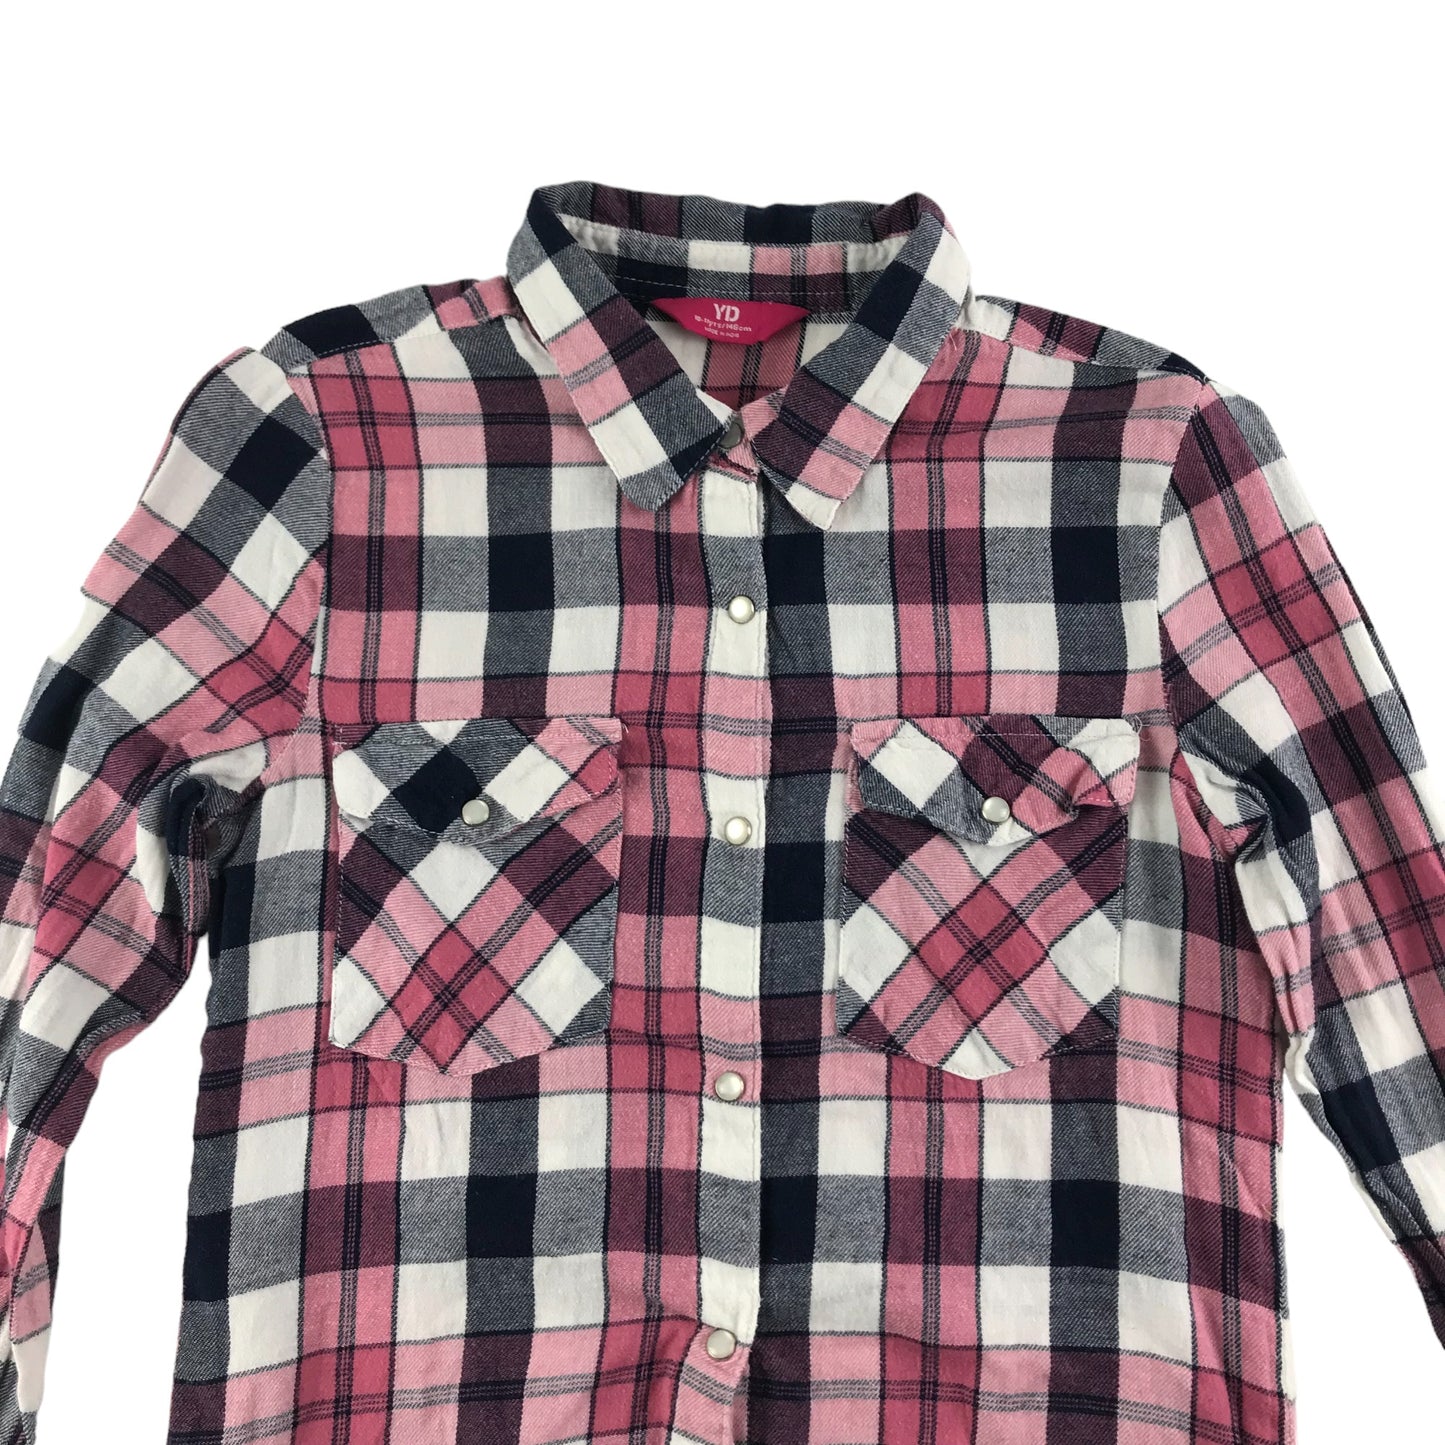 Young Dimensions Shirt Age 10 Navy Pink Checked Pattern Button up Cotton